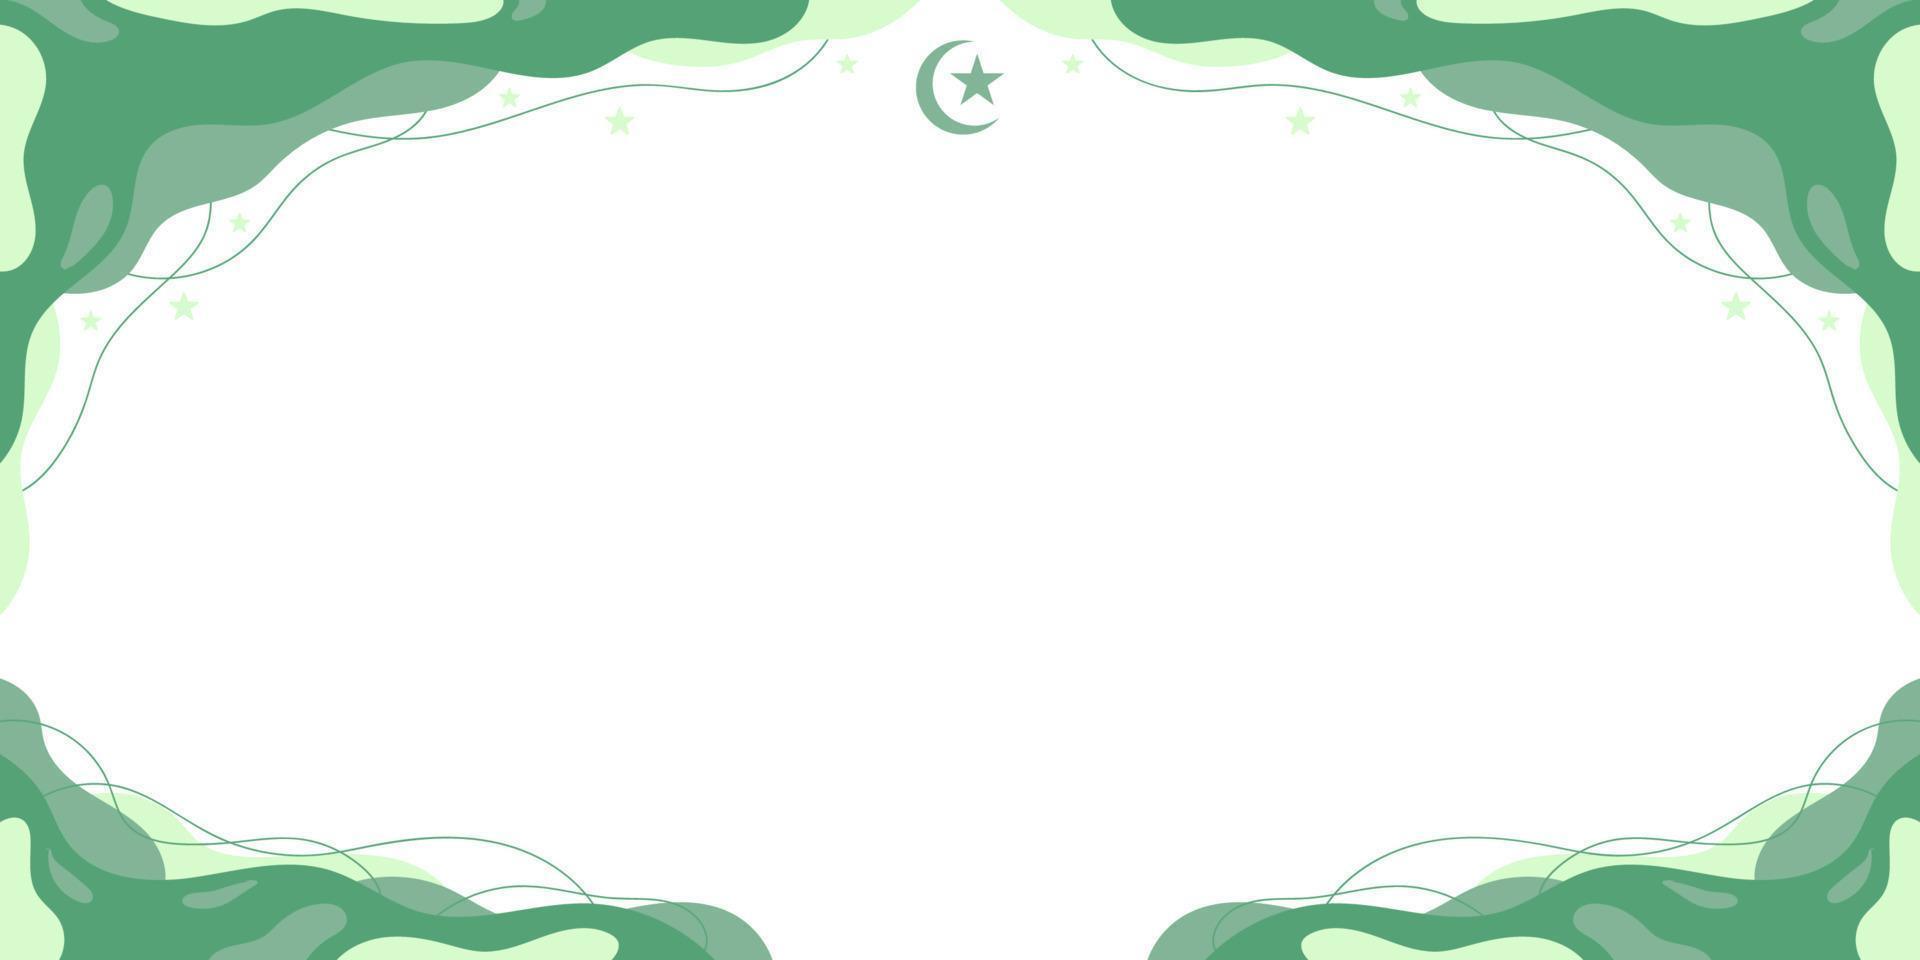 Islamic Green Abstract Banner Background vector